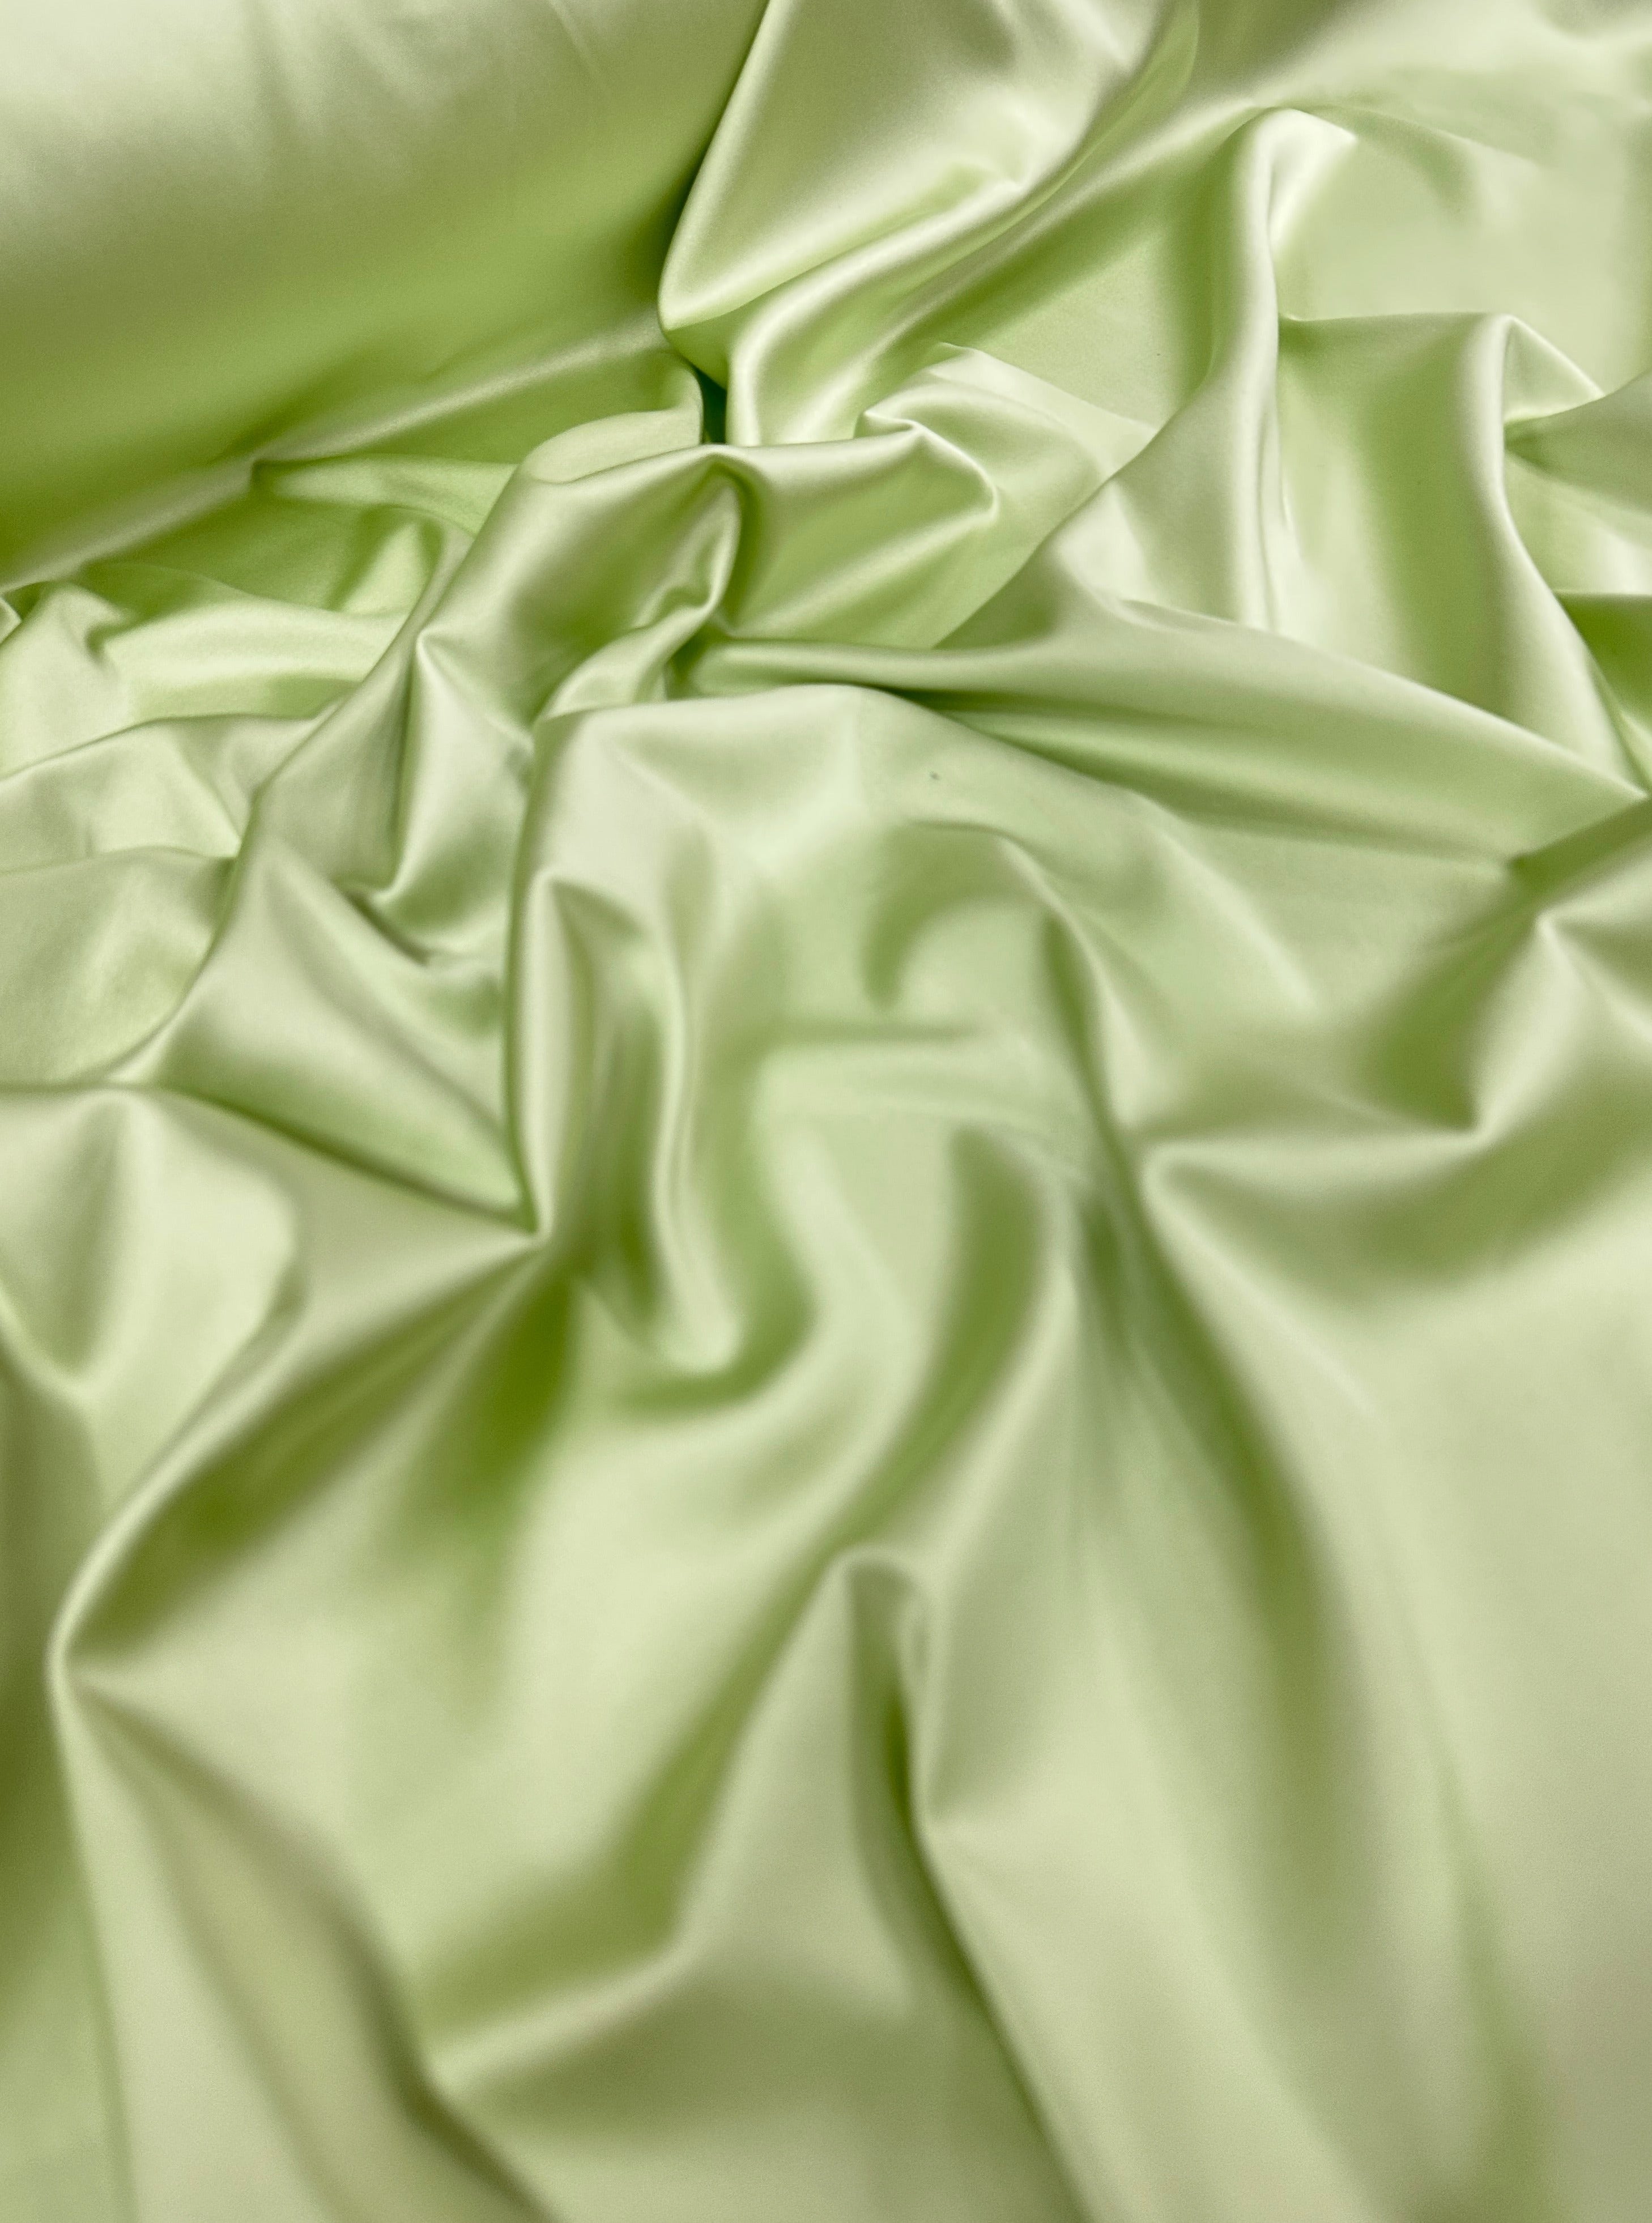 shiny silk fabric, solid silk, solid satin, stretch silk charmeuse, silk fabric by the yard, natural silk, pure silk, 100% pure silk, natural fabric, kiki textiles, online fabric store usa, luxurious fabric, silk satin online, fancy silk, soft silk, smooth silk, 100% natural silk, charmeuse satin, green natural silk, green silk, pistachio natural silk, pistachio silk, green natural stretch silk, pistachio silk, pistachio silk, baby pink silk, green silk satin, pistachio silk satin, light green silk